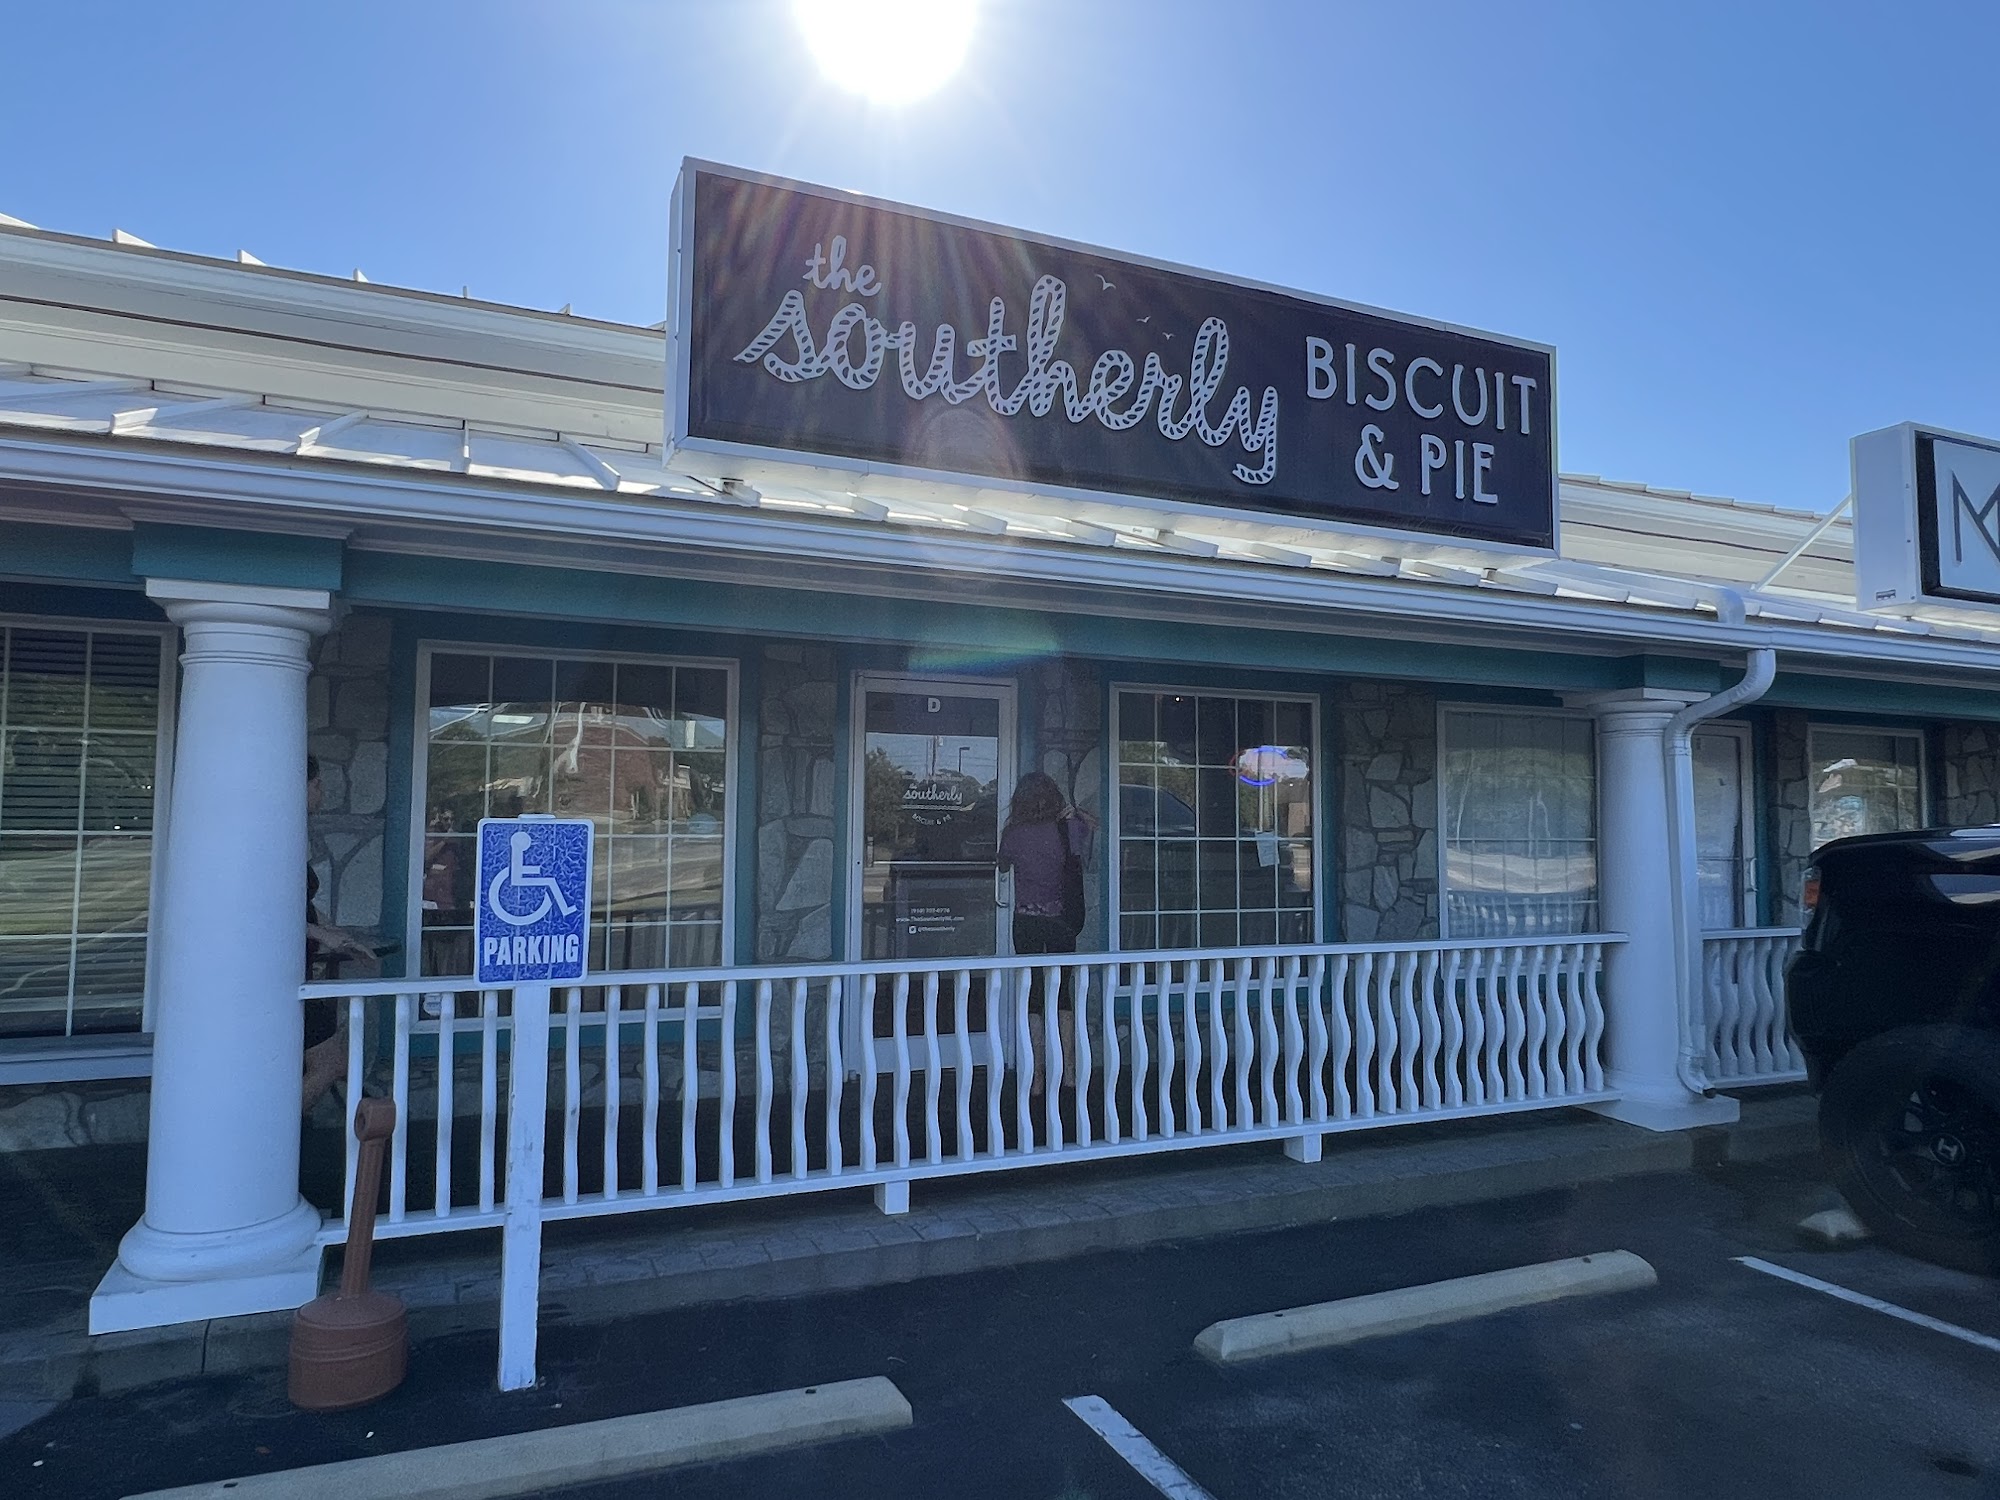 The Southerly Biscuit & Pie